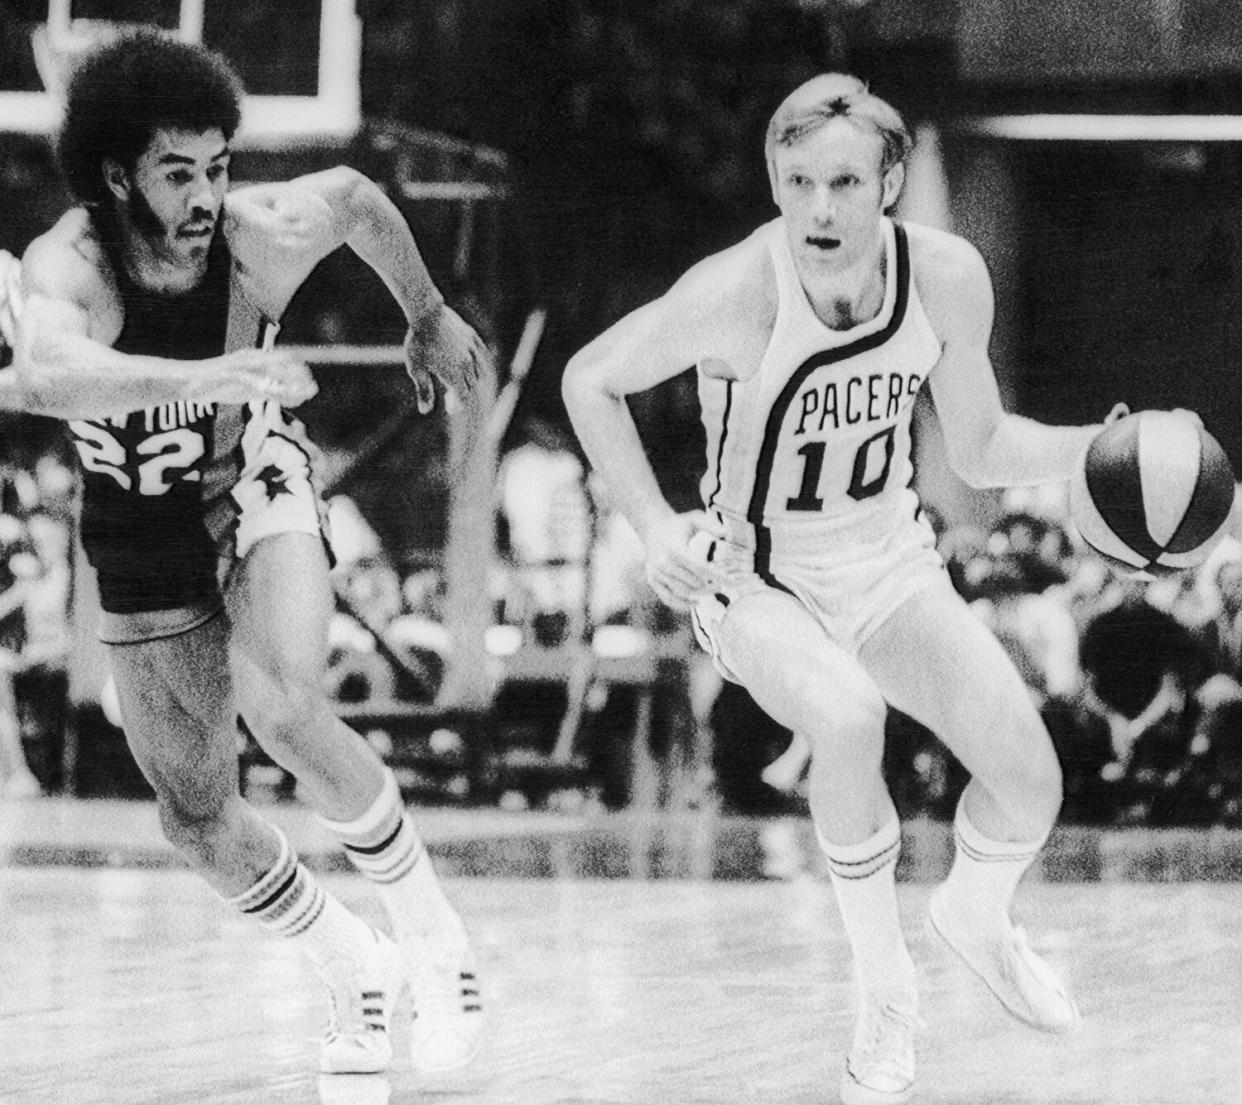 Ollie Taylor (22) of the New York Mets chases Indiana's Rick Mount (10) down court in an American Basketball Association (ABA) playoff game.